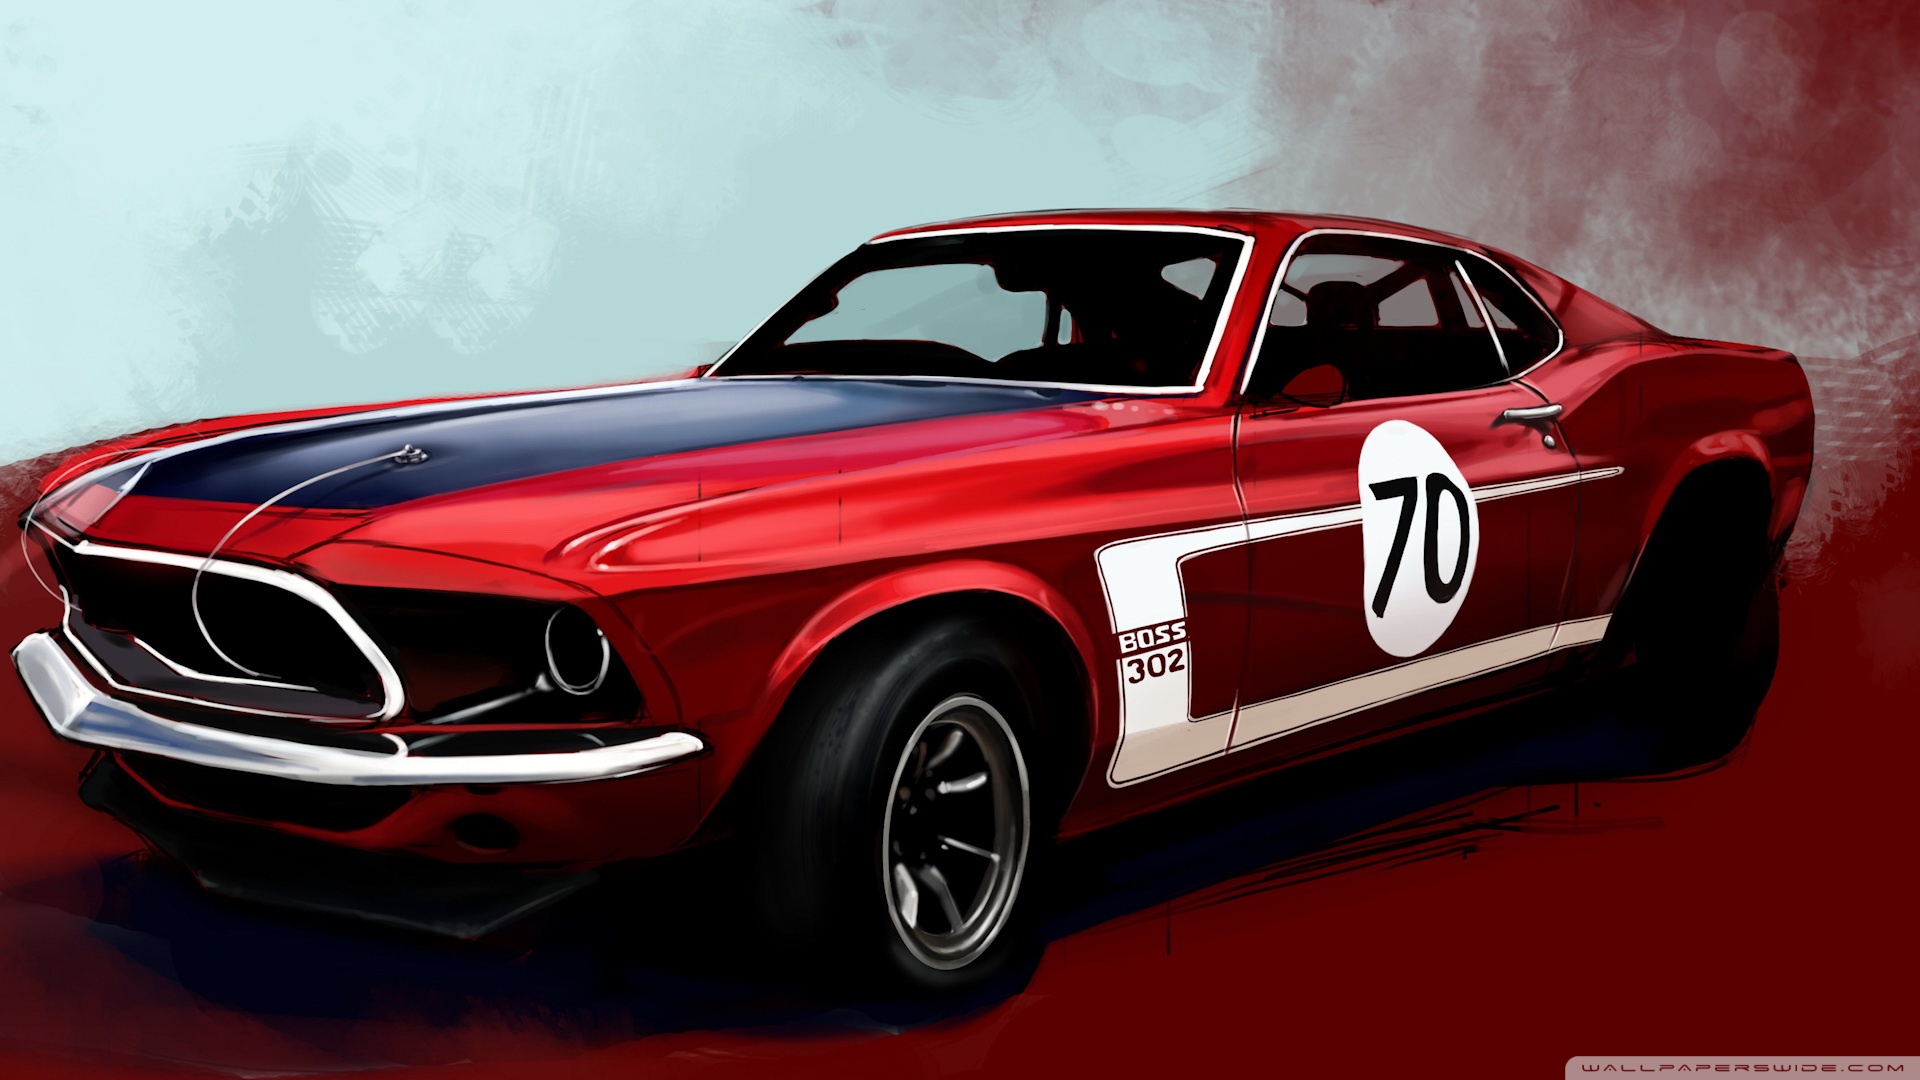 Ford Mustang Boss 302 Classic Car Wallpaper - Old Mustang Wallpaper Hd -  1920x1080 Wallpaper 